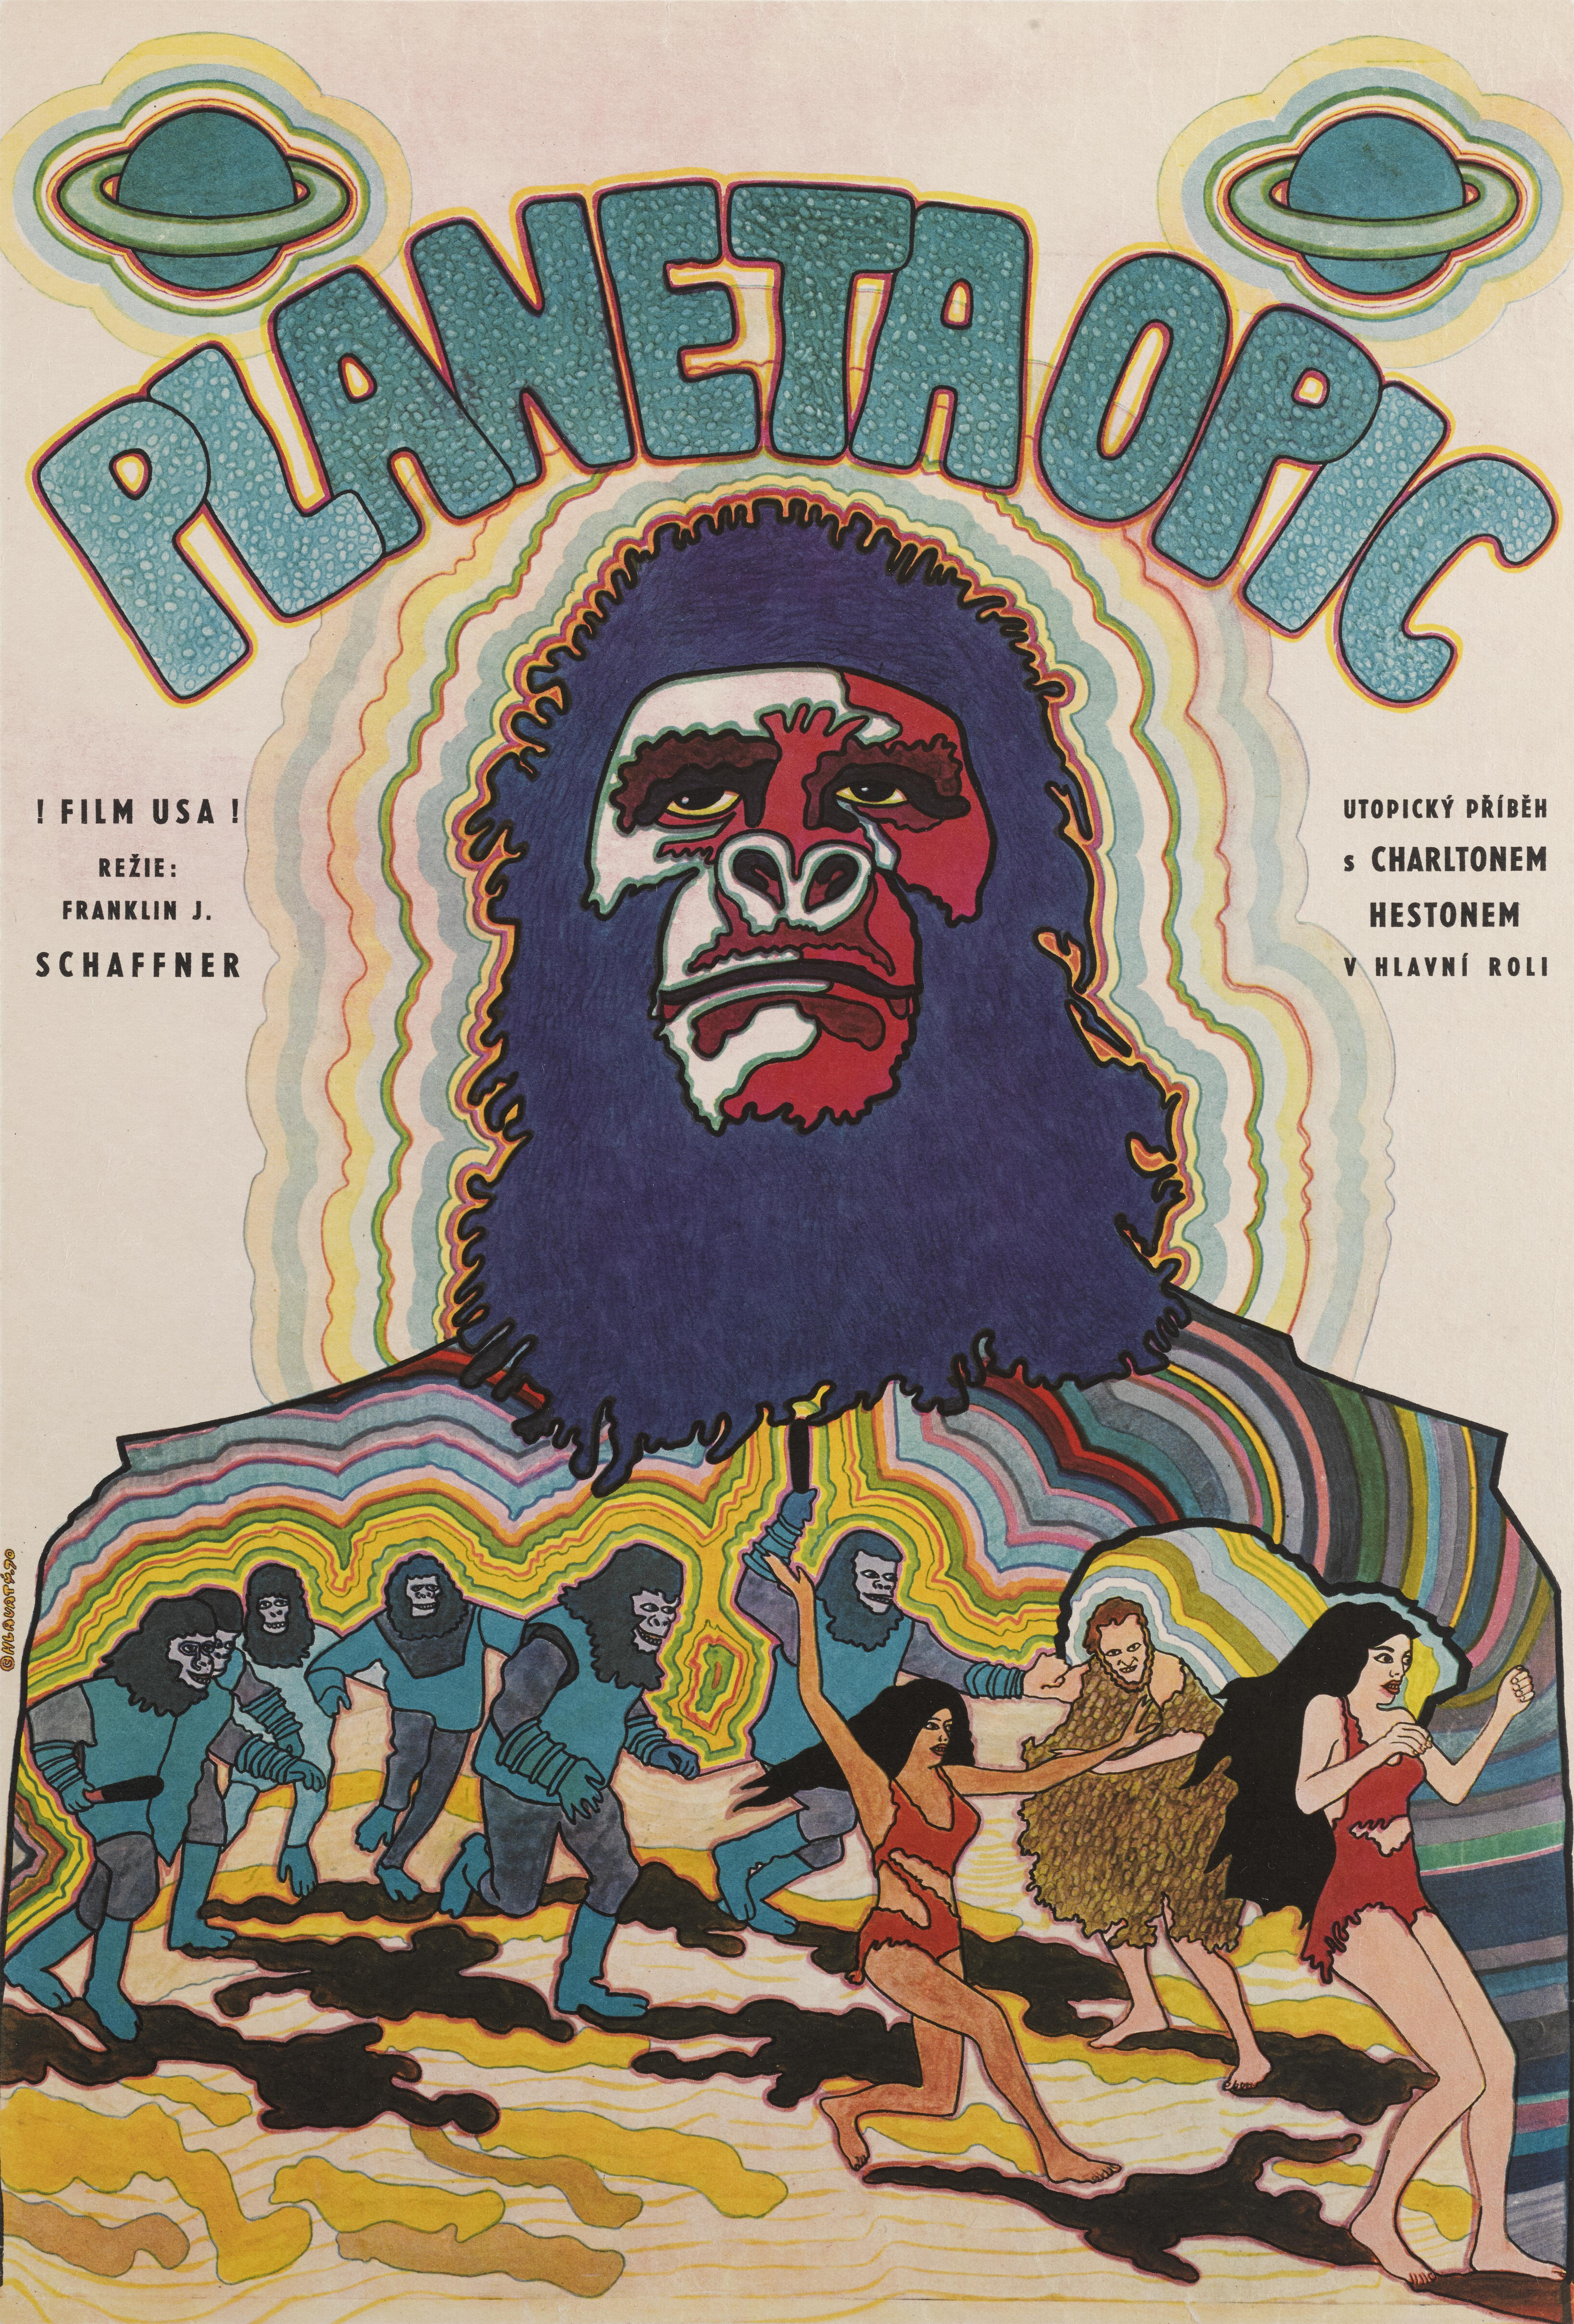 Original Czech film poster for the first Planet of the Apes movie in 1968.
vratislav hlavatý created this great looking poster for The films first Czech release in 1970.
This cult sci-fi film was directed by Franklin J. Schaffner, and stars Charlton